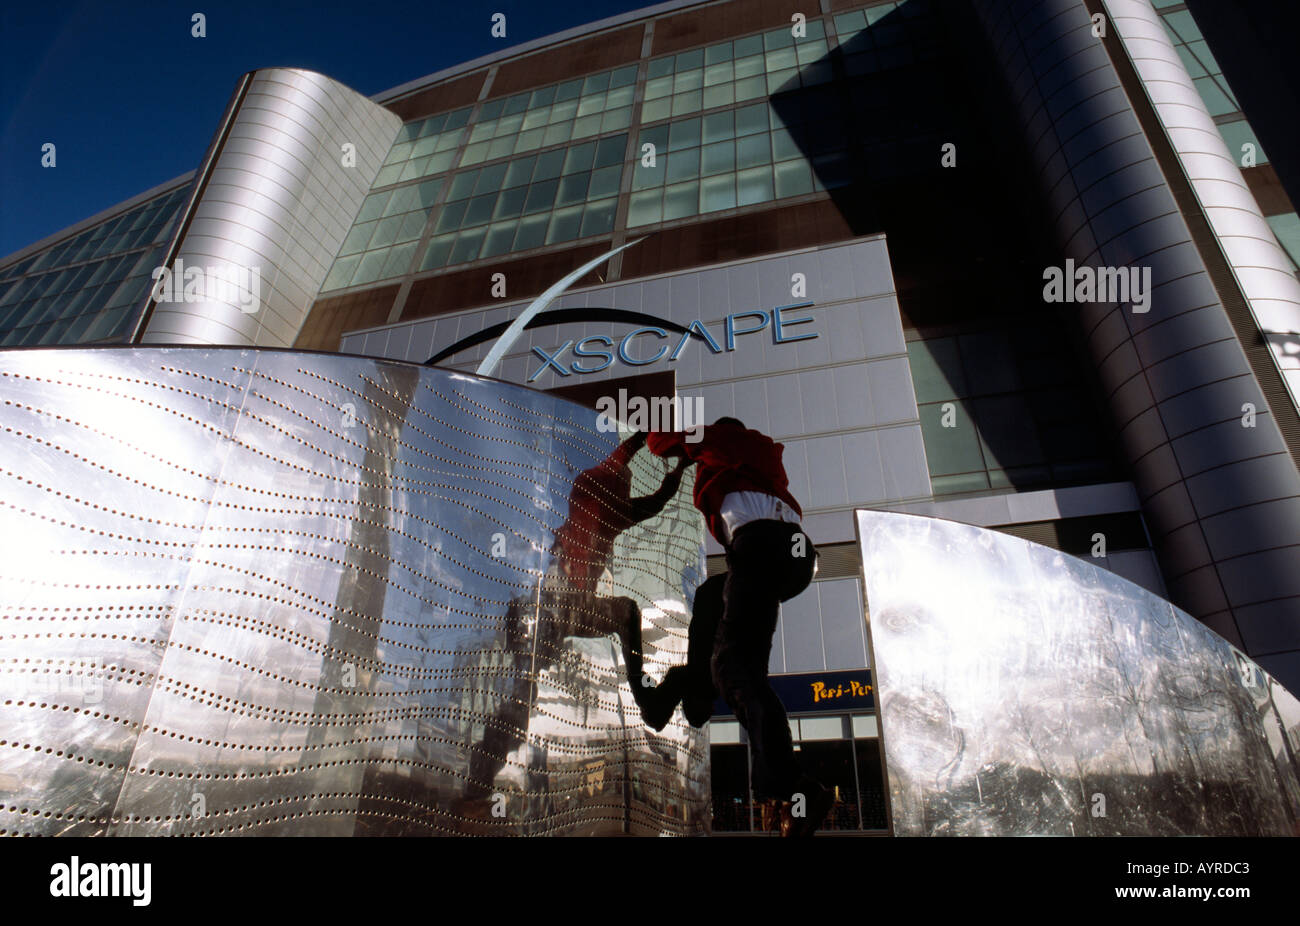 PICTURE CREDIT DOUG BLANE Doug Blane practicing Le Parkour climbing freerunning outside the Xscape snow dome Central Milton Keyn Stock Photo